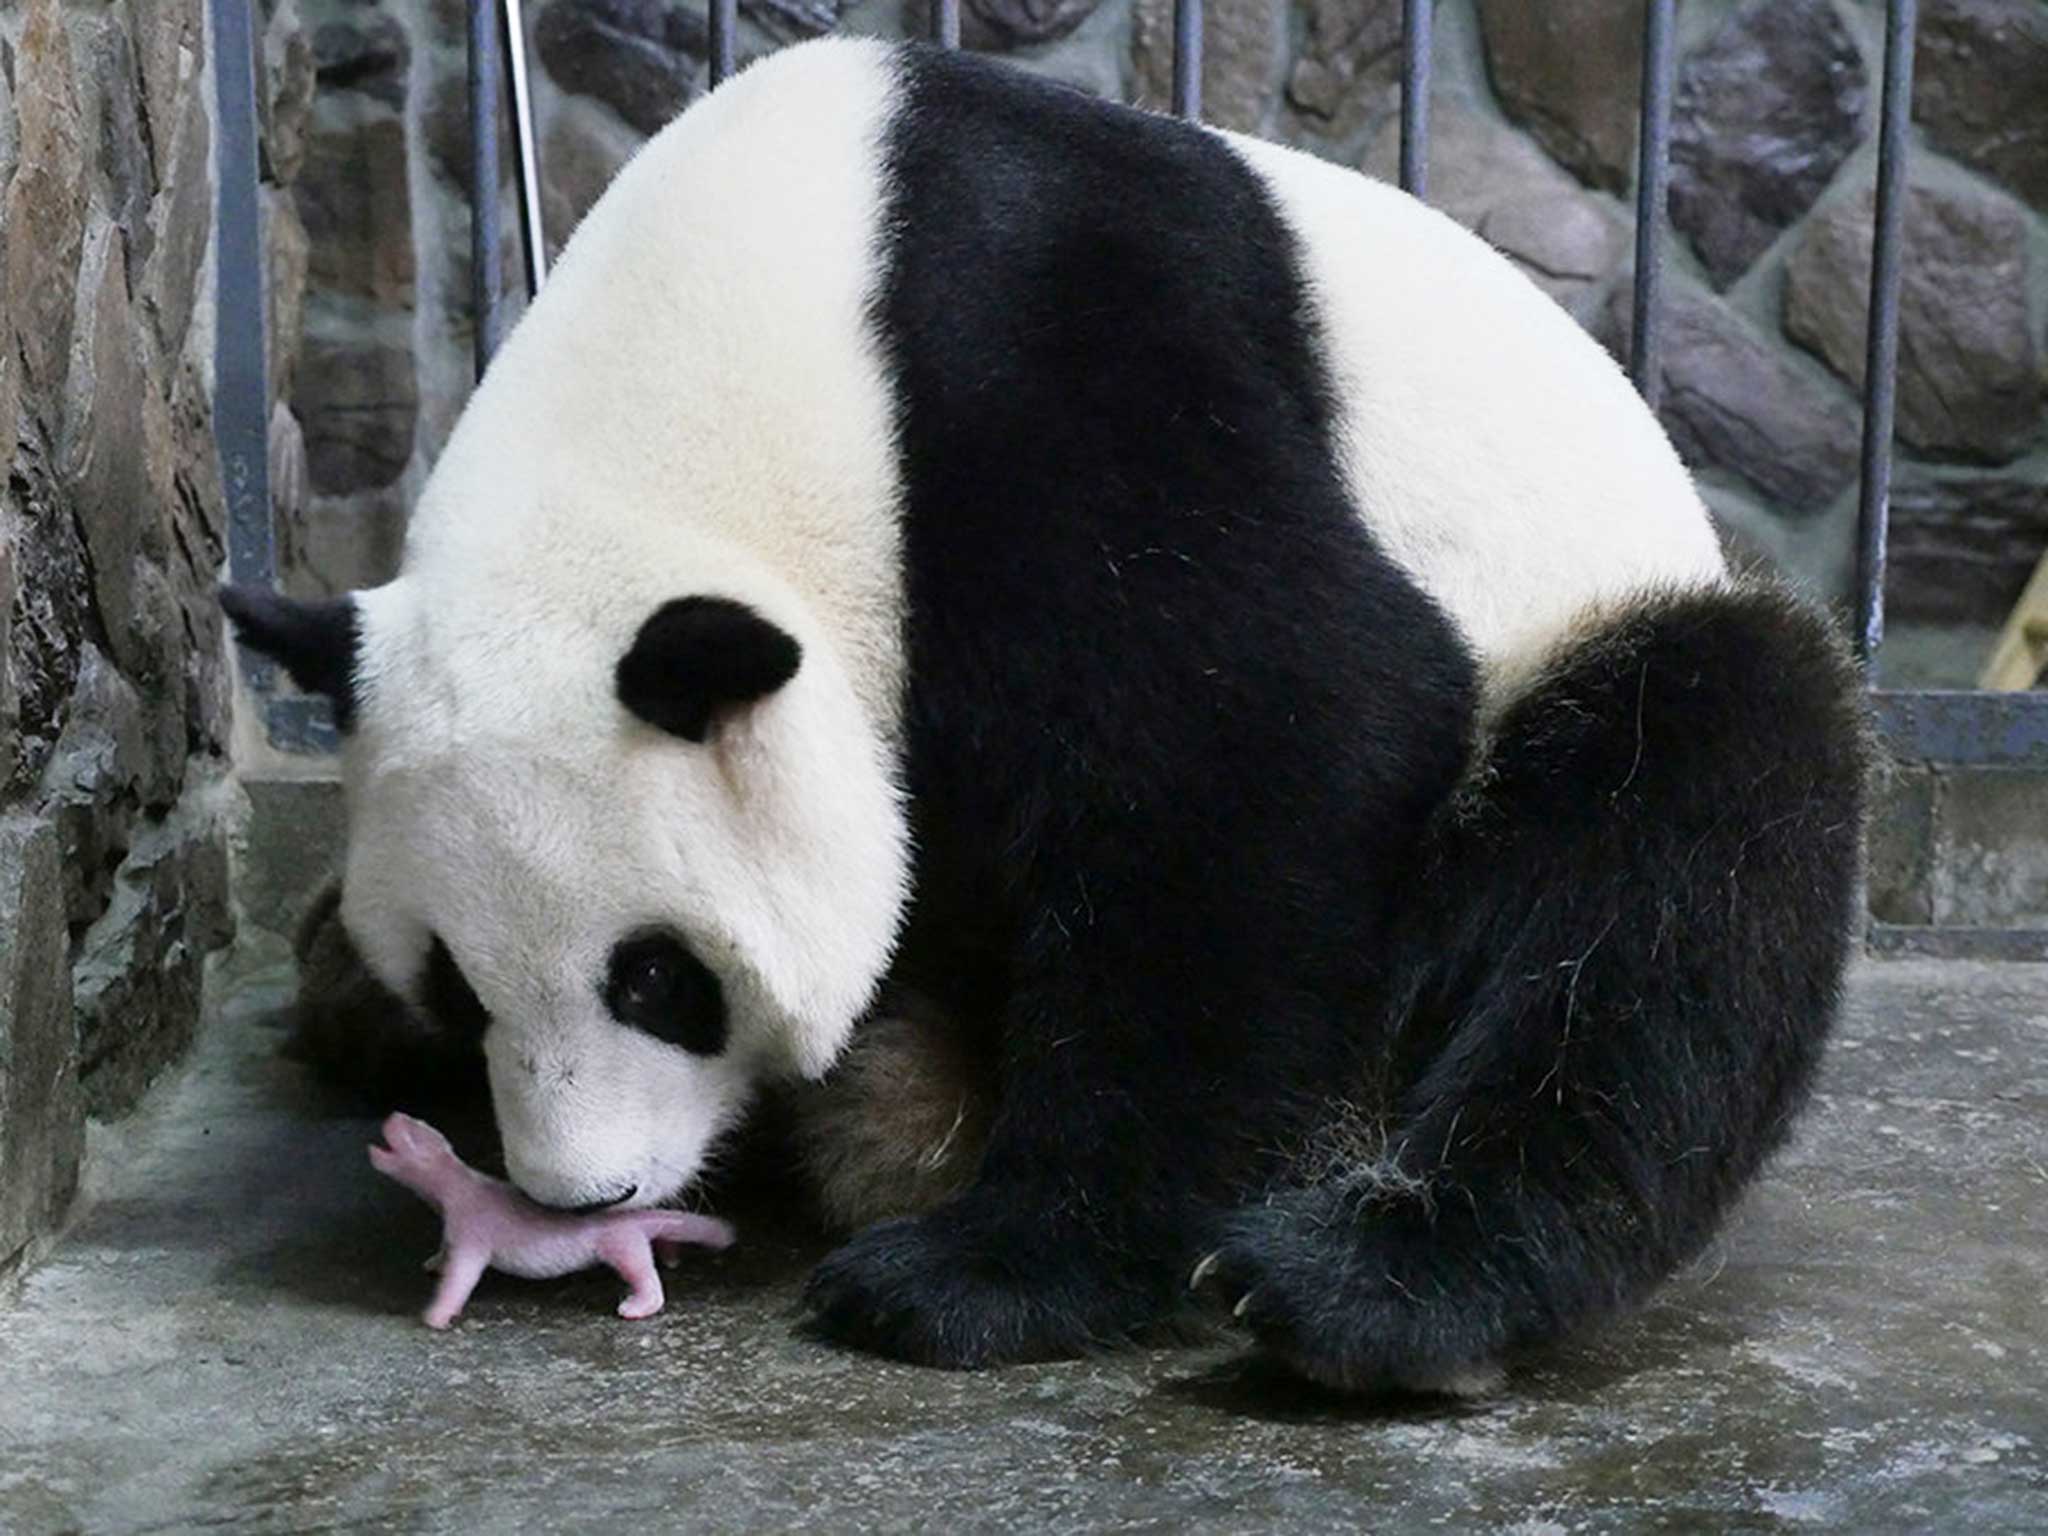 Hao Hao is seen with her new-born cub at a giant panda breeding centre in Chengdu, Sichuan Province, China